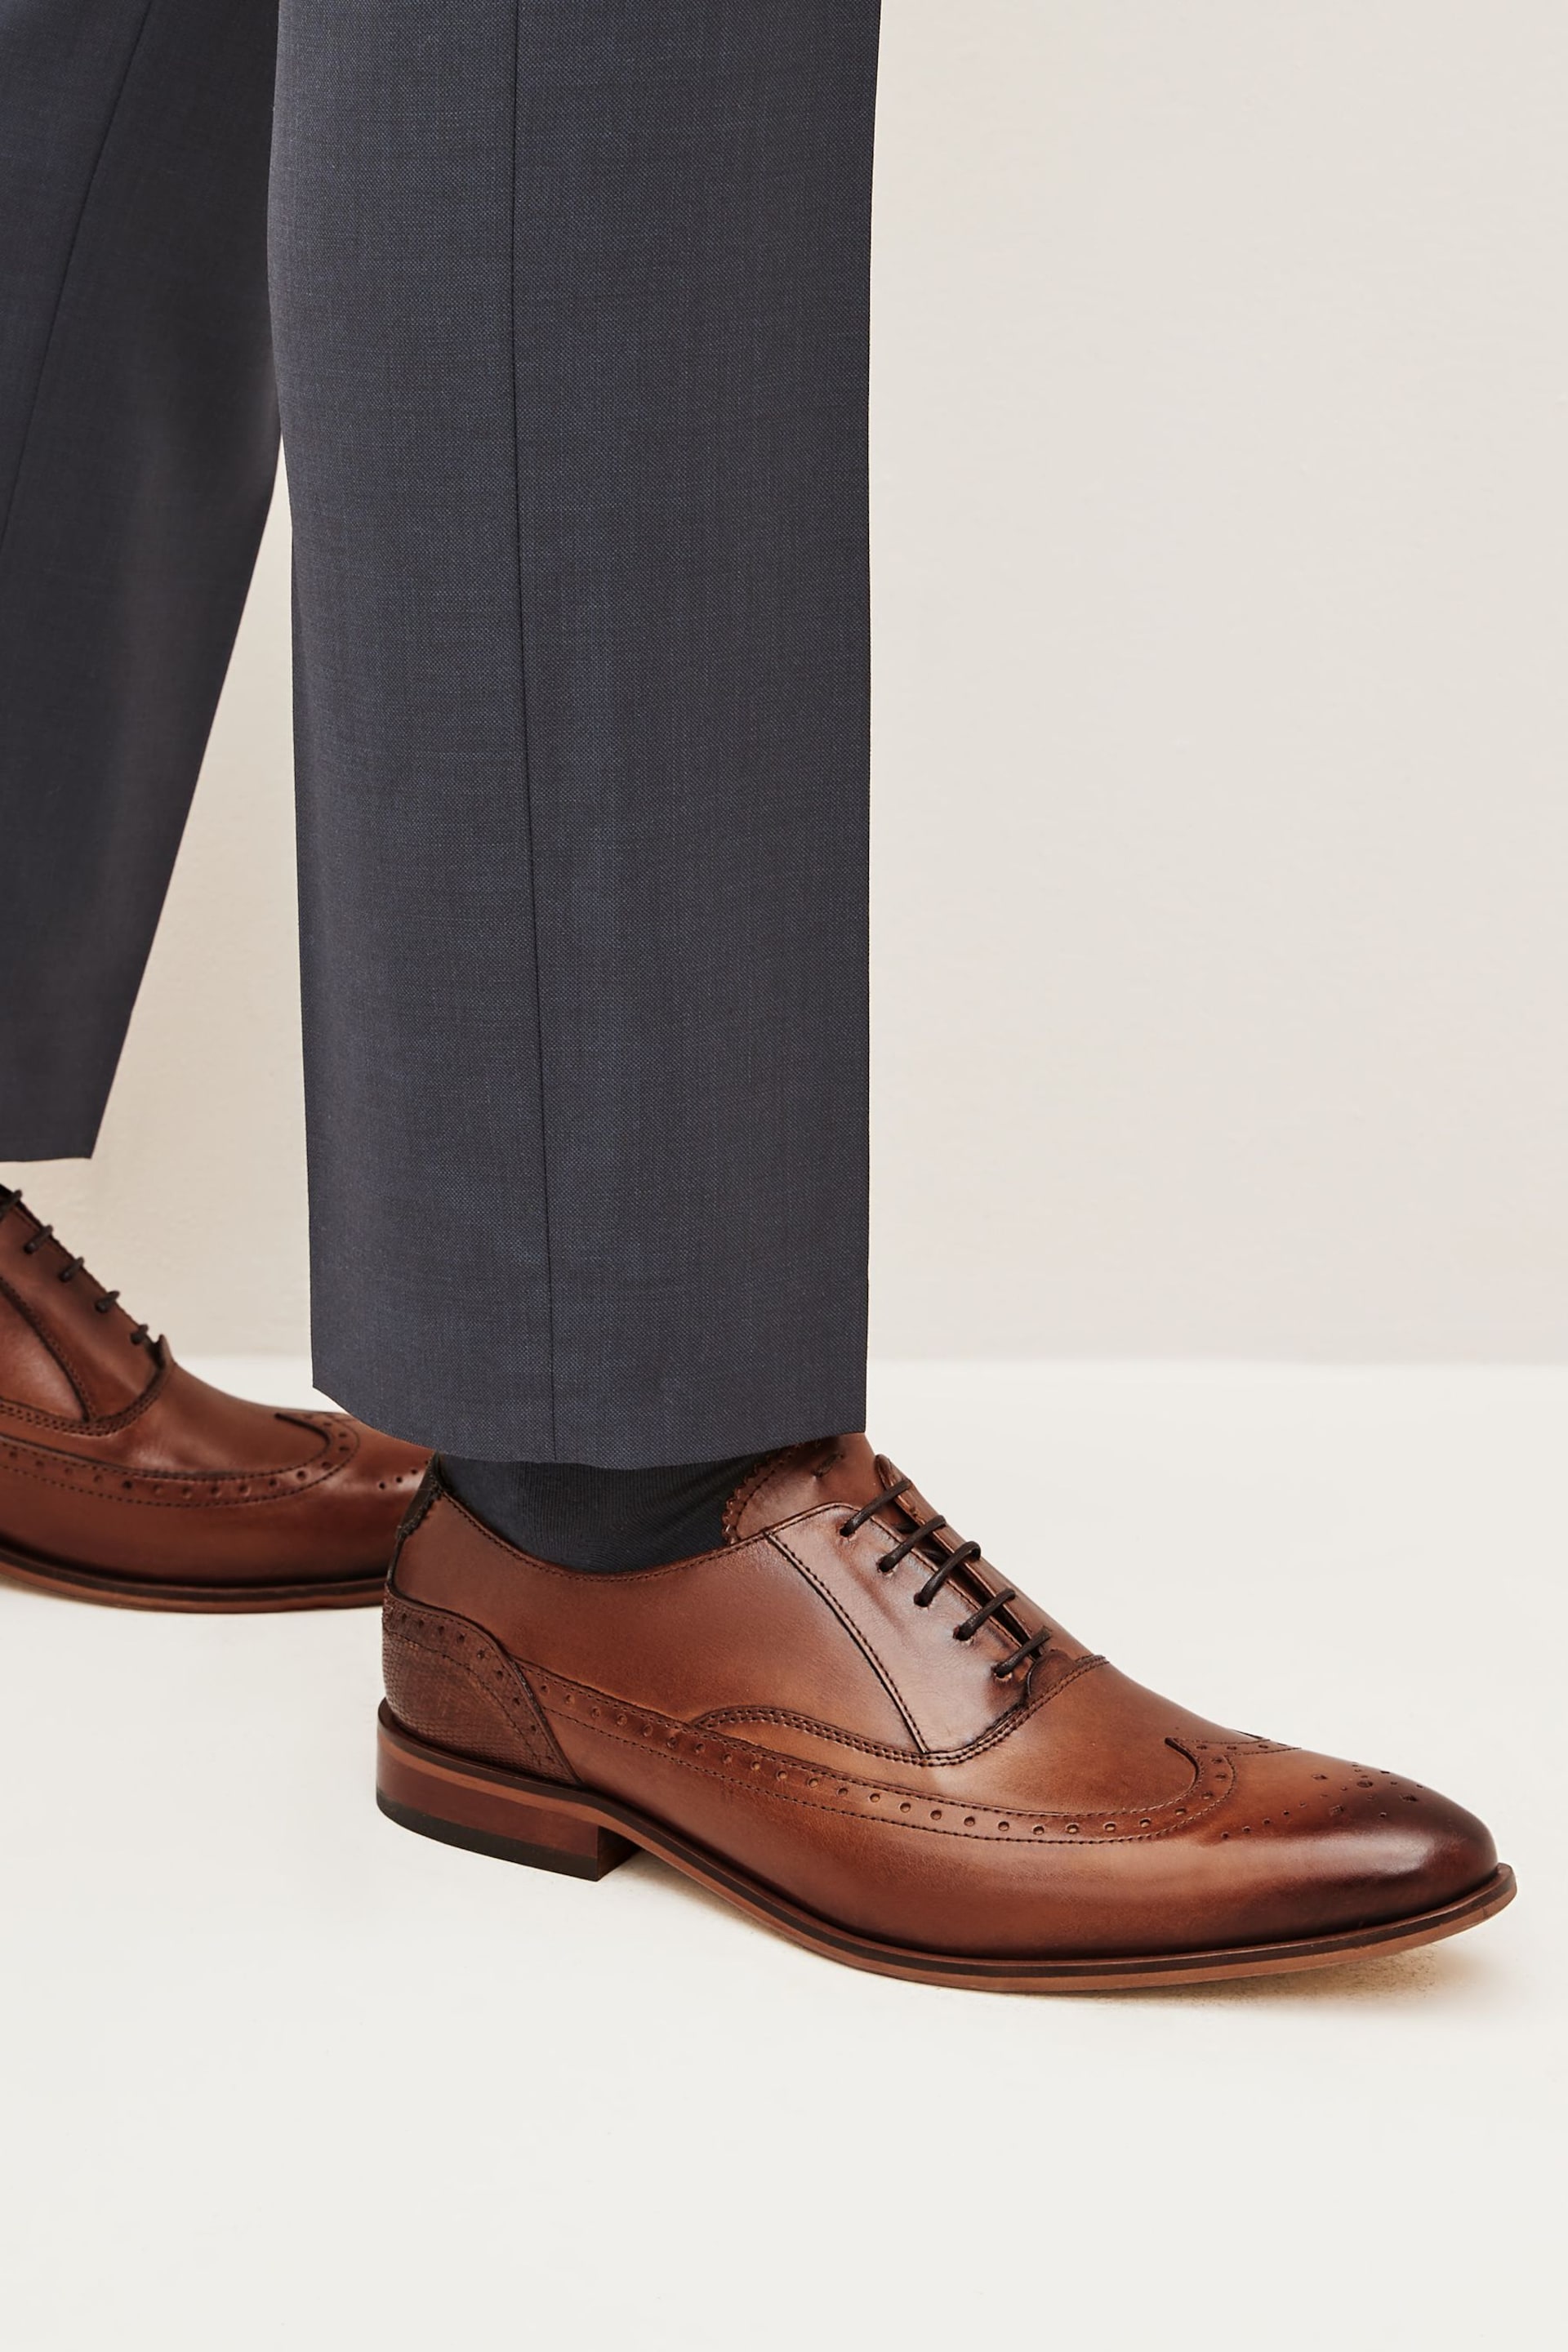 Dark Tan Brown Leather Oxford Wing Cap Brogue Shoes - Image 1 of 8